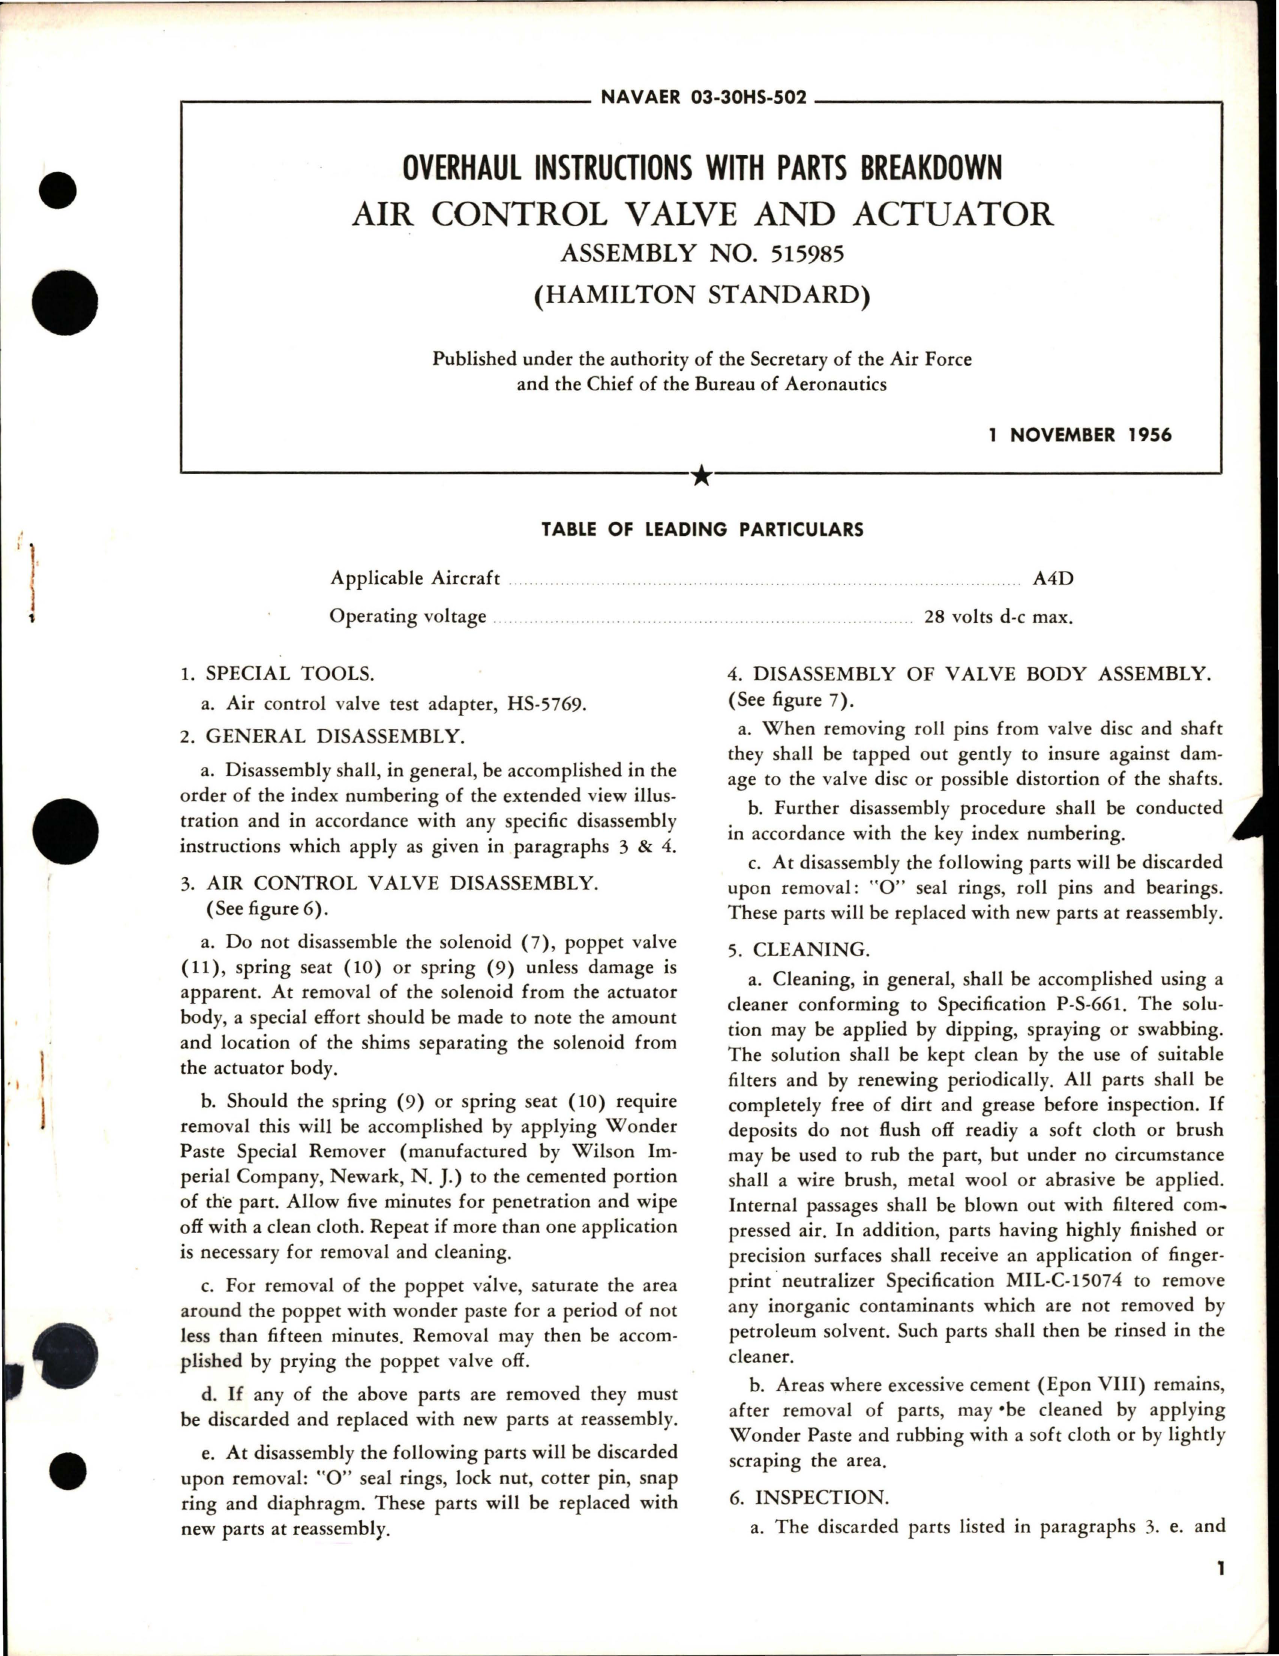 Sample page 1 from AirCorps Library document: Overhaul Instructions with Parts Breakdown for Air Control Valve and Actuator Assembly - 515985